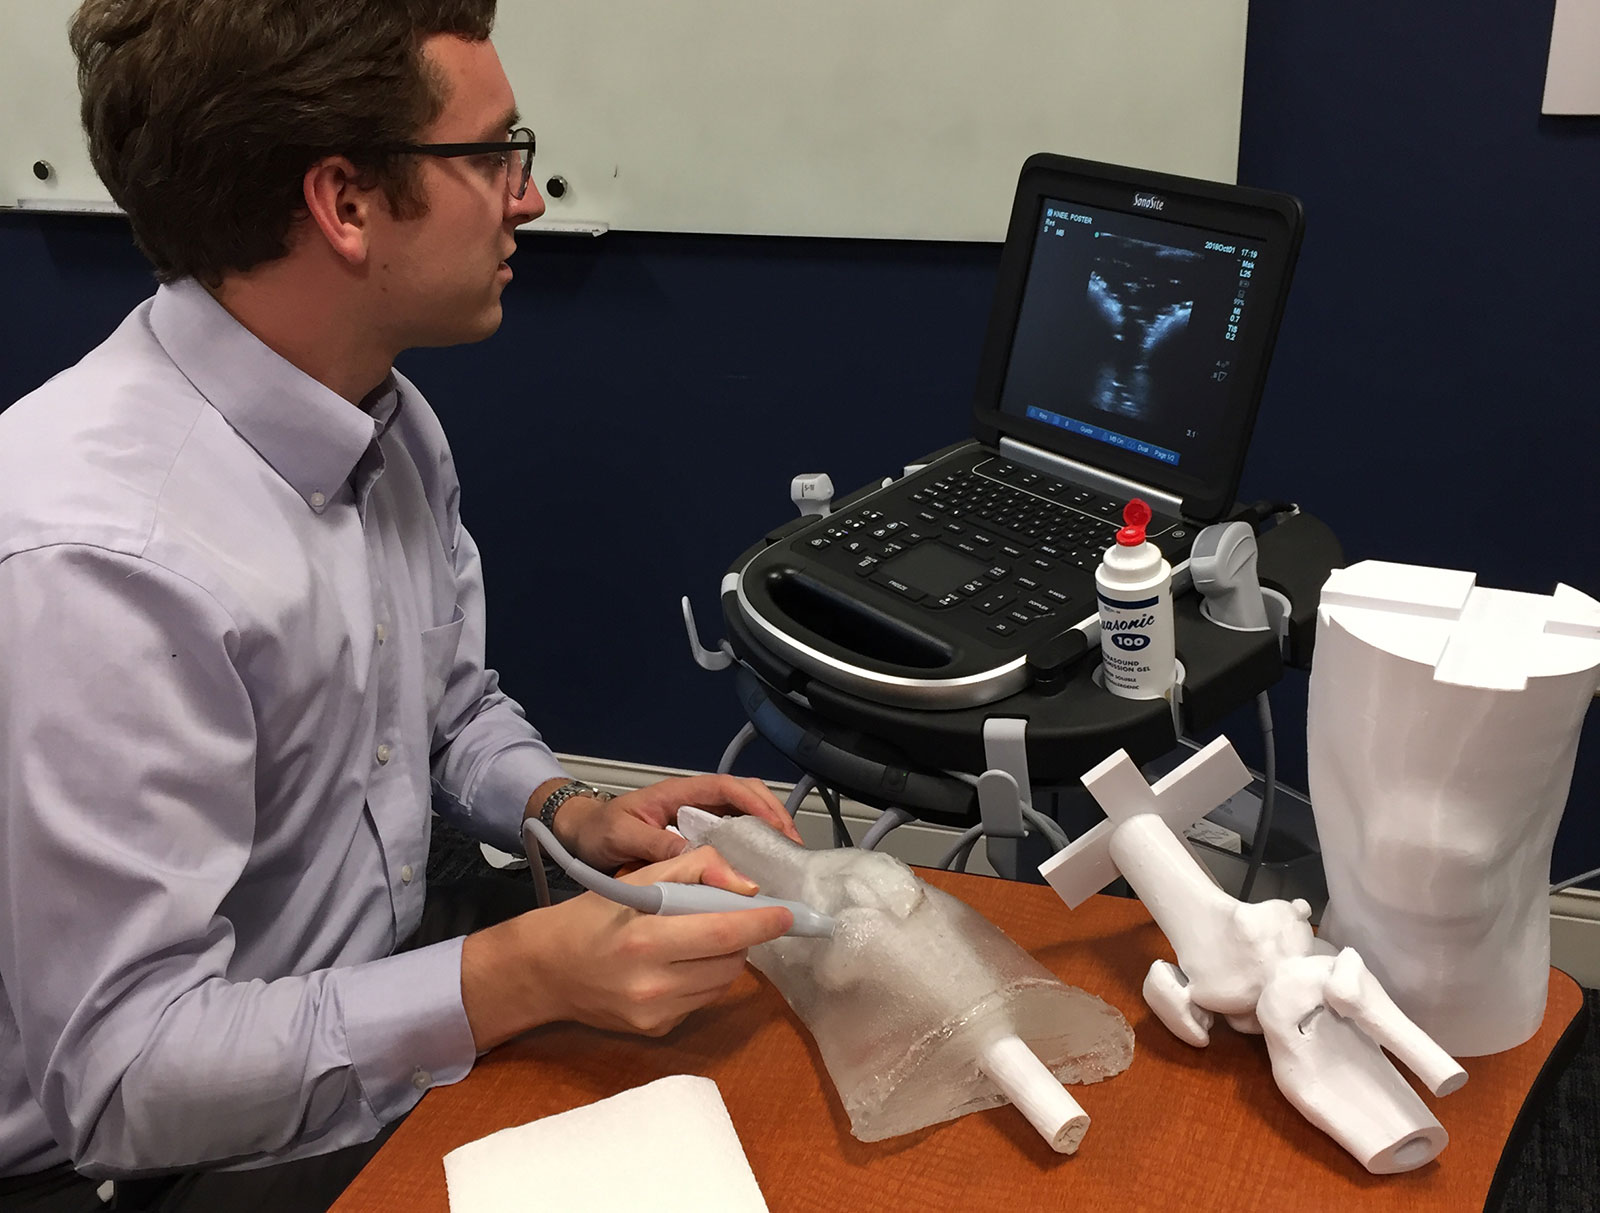 Penn State College of Medicine medical student Jason Spicher is seen using his 3D-printed ultrasound phantom to practice giving ultrasound-guided knee injections. Spicher is pictured sitting at a table with a knee model in front of him, looking at a machine with a keyboard and ultrasound image on it.